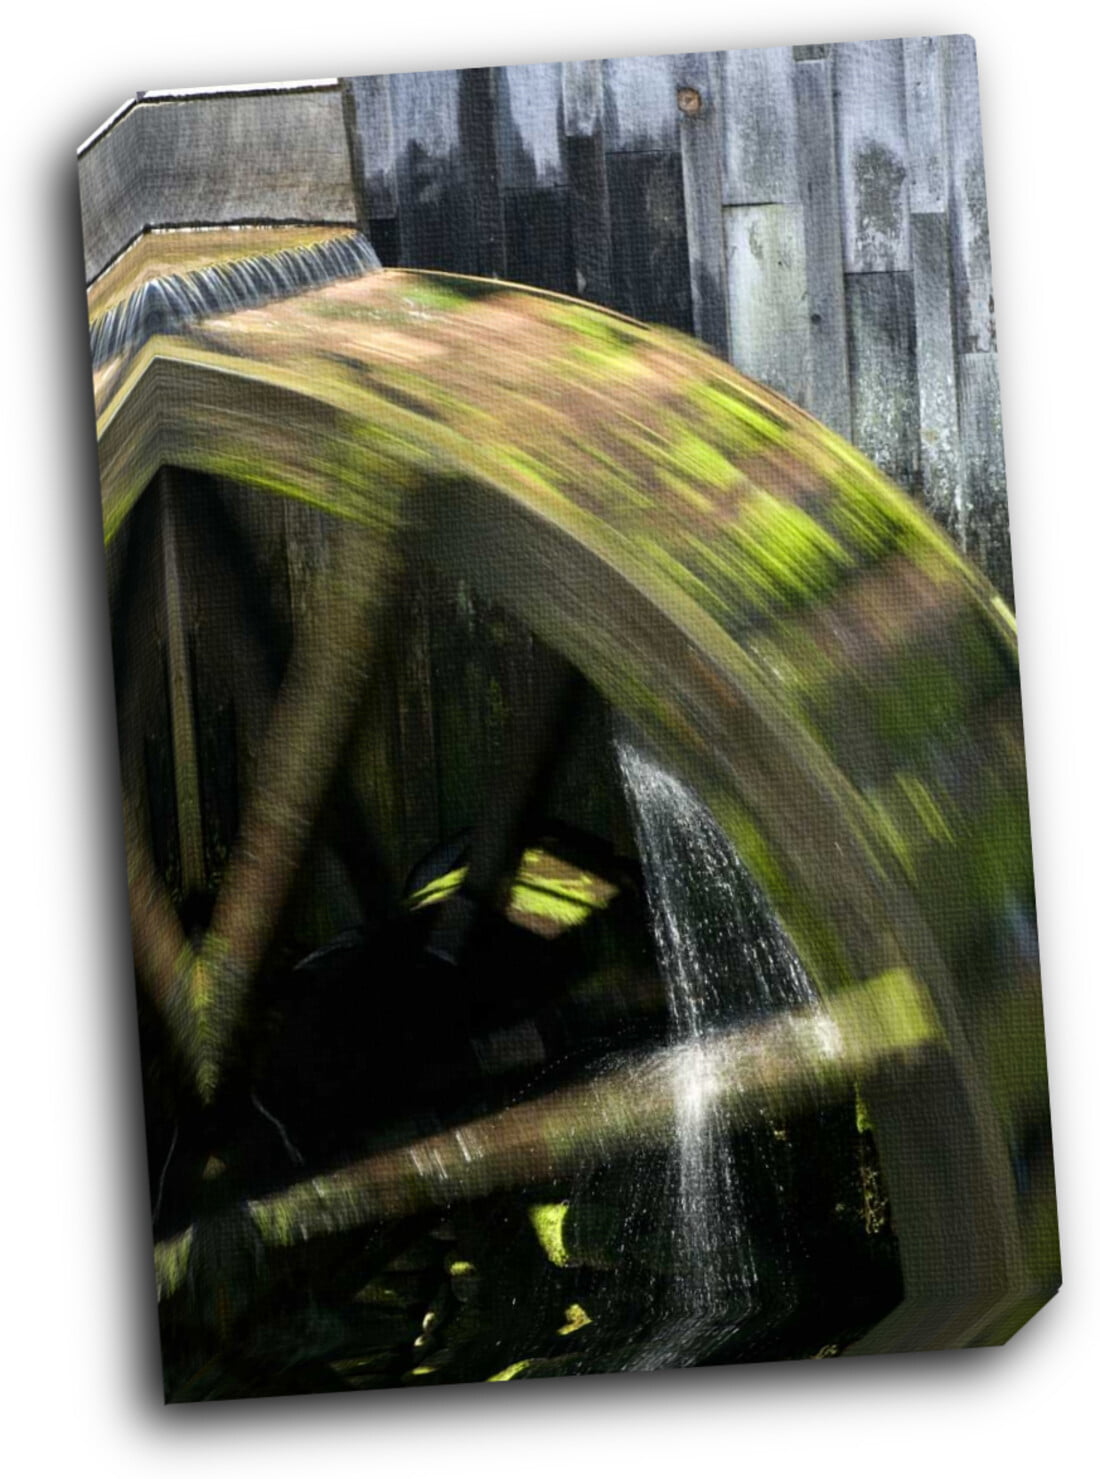 Grist Mill Water Wheel In Cades Cove Art Print Home Decor Wall Art Poster C 